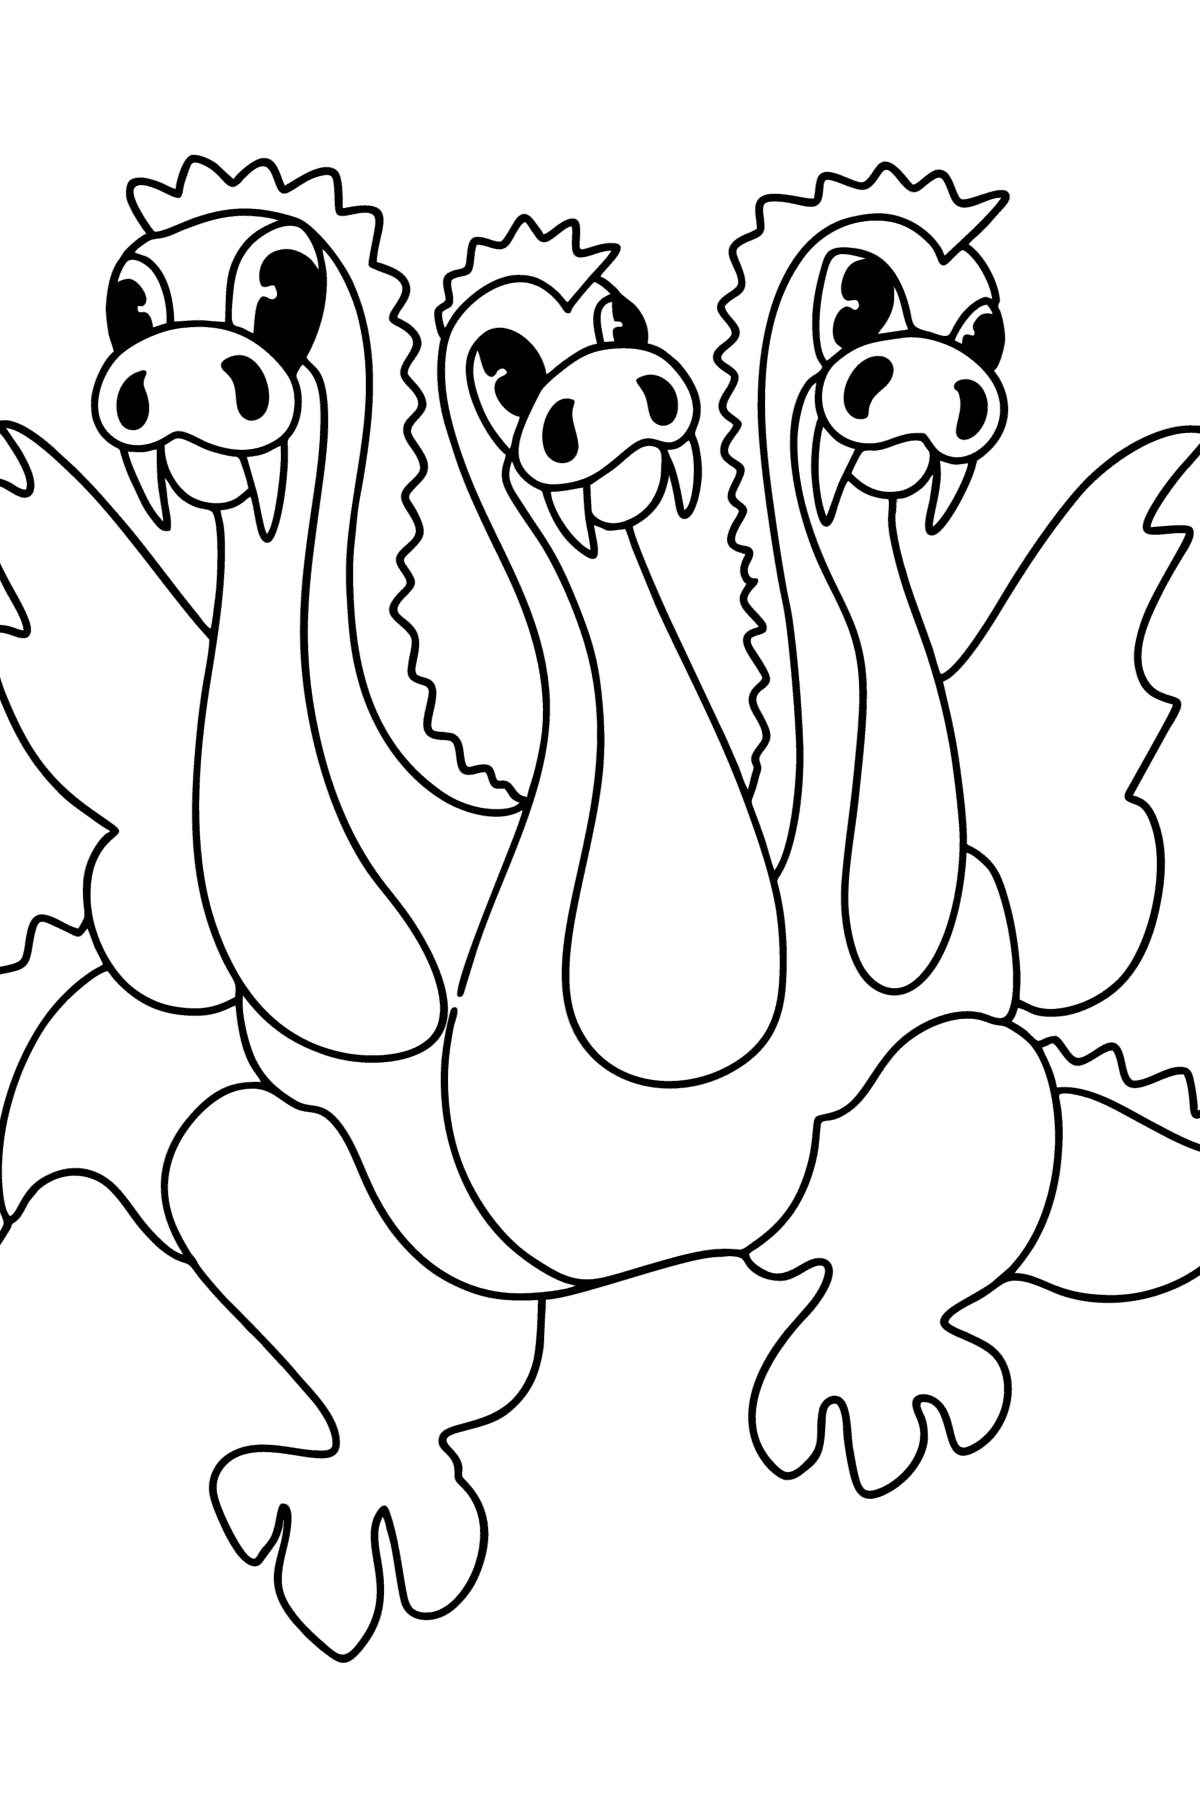 Fairy dragon coloring page - Coloring Pages for Kids